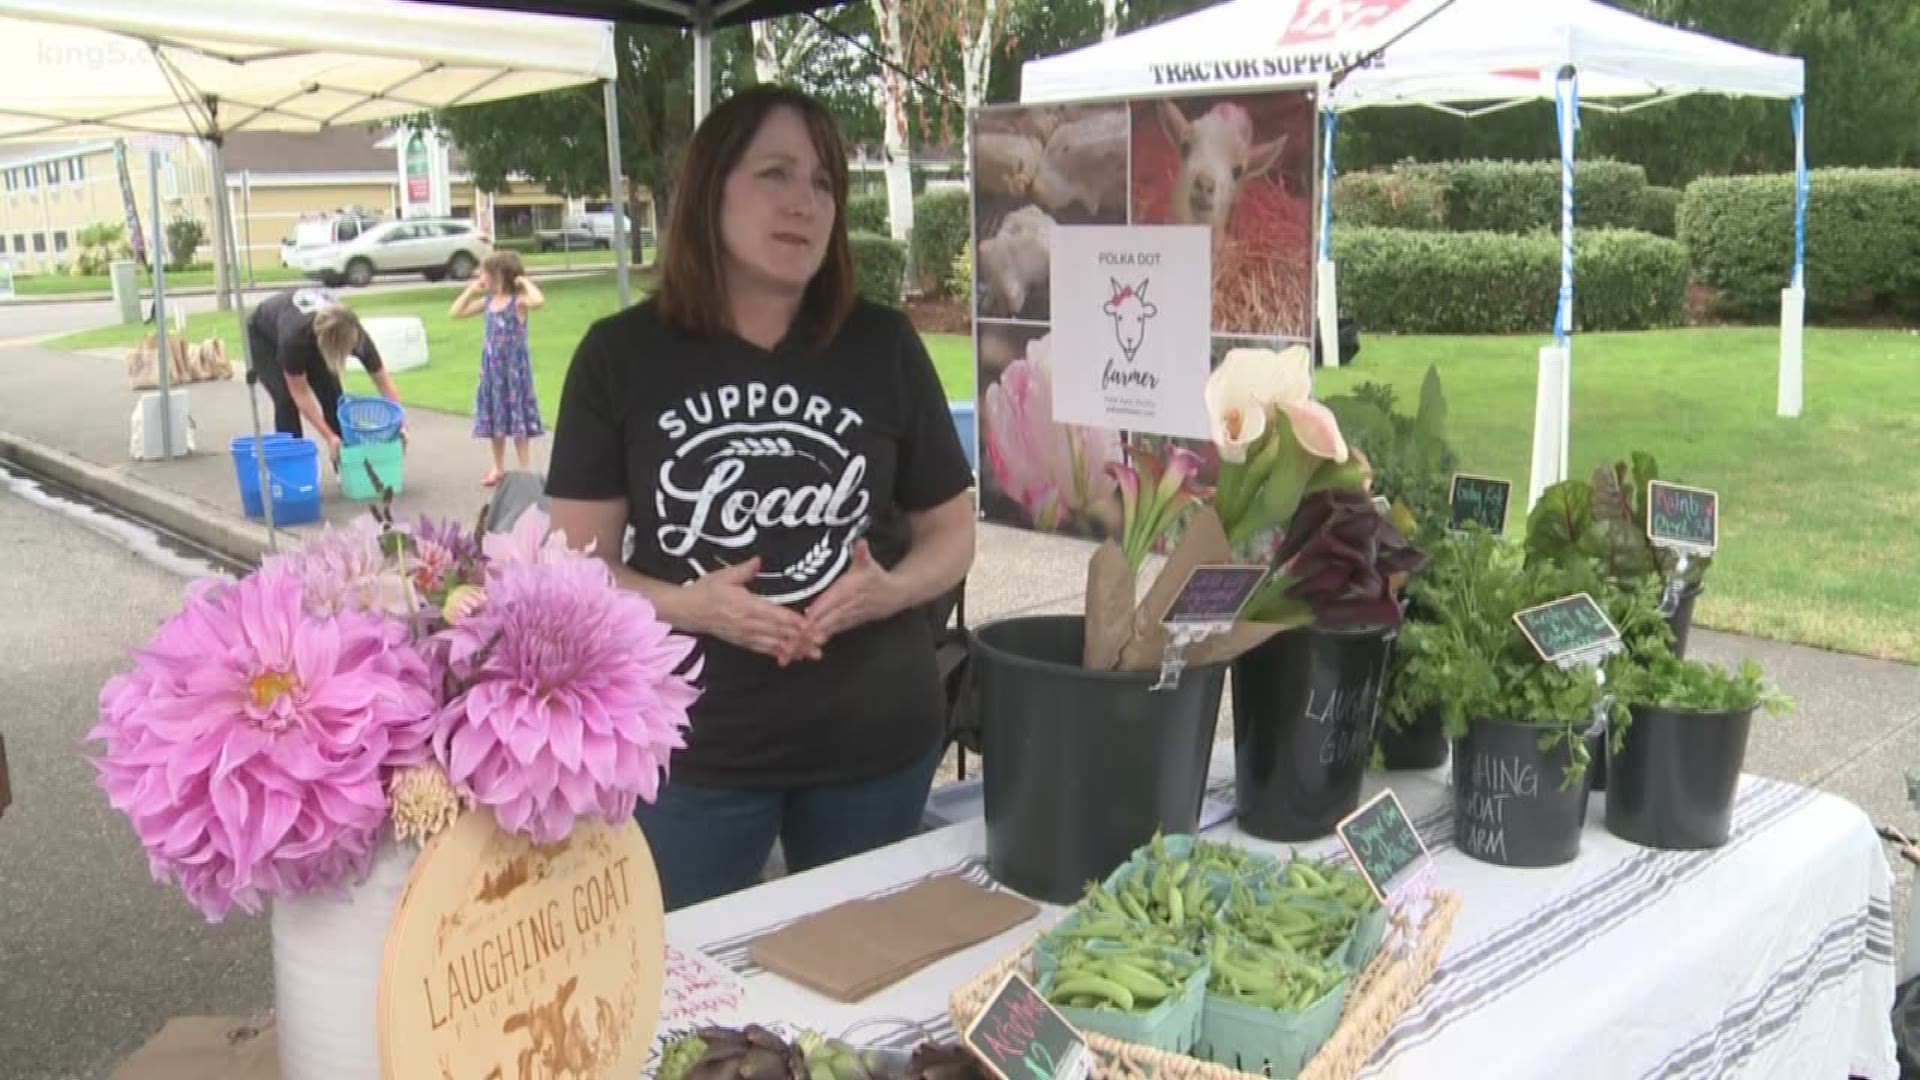 A farmer's market has launched in Enumclaw to help save local food in King County. KING 5's Alison Morrow reports.